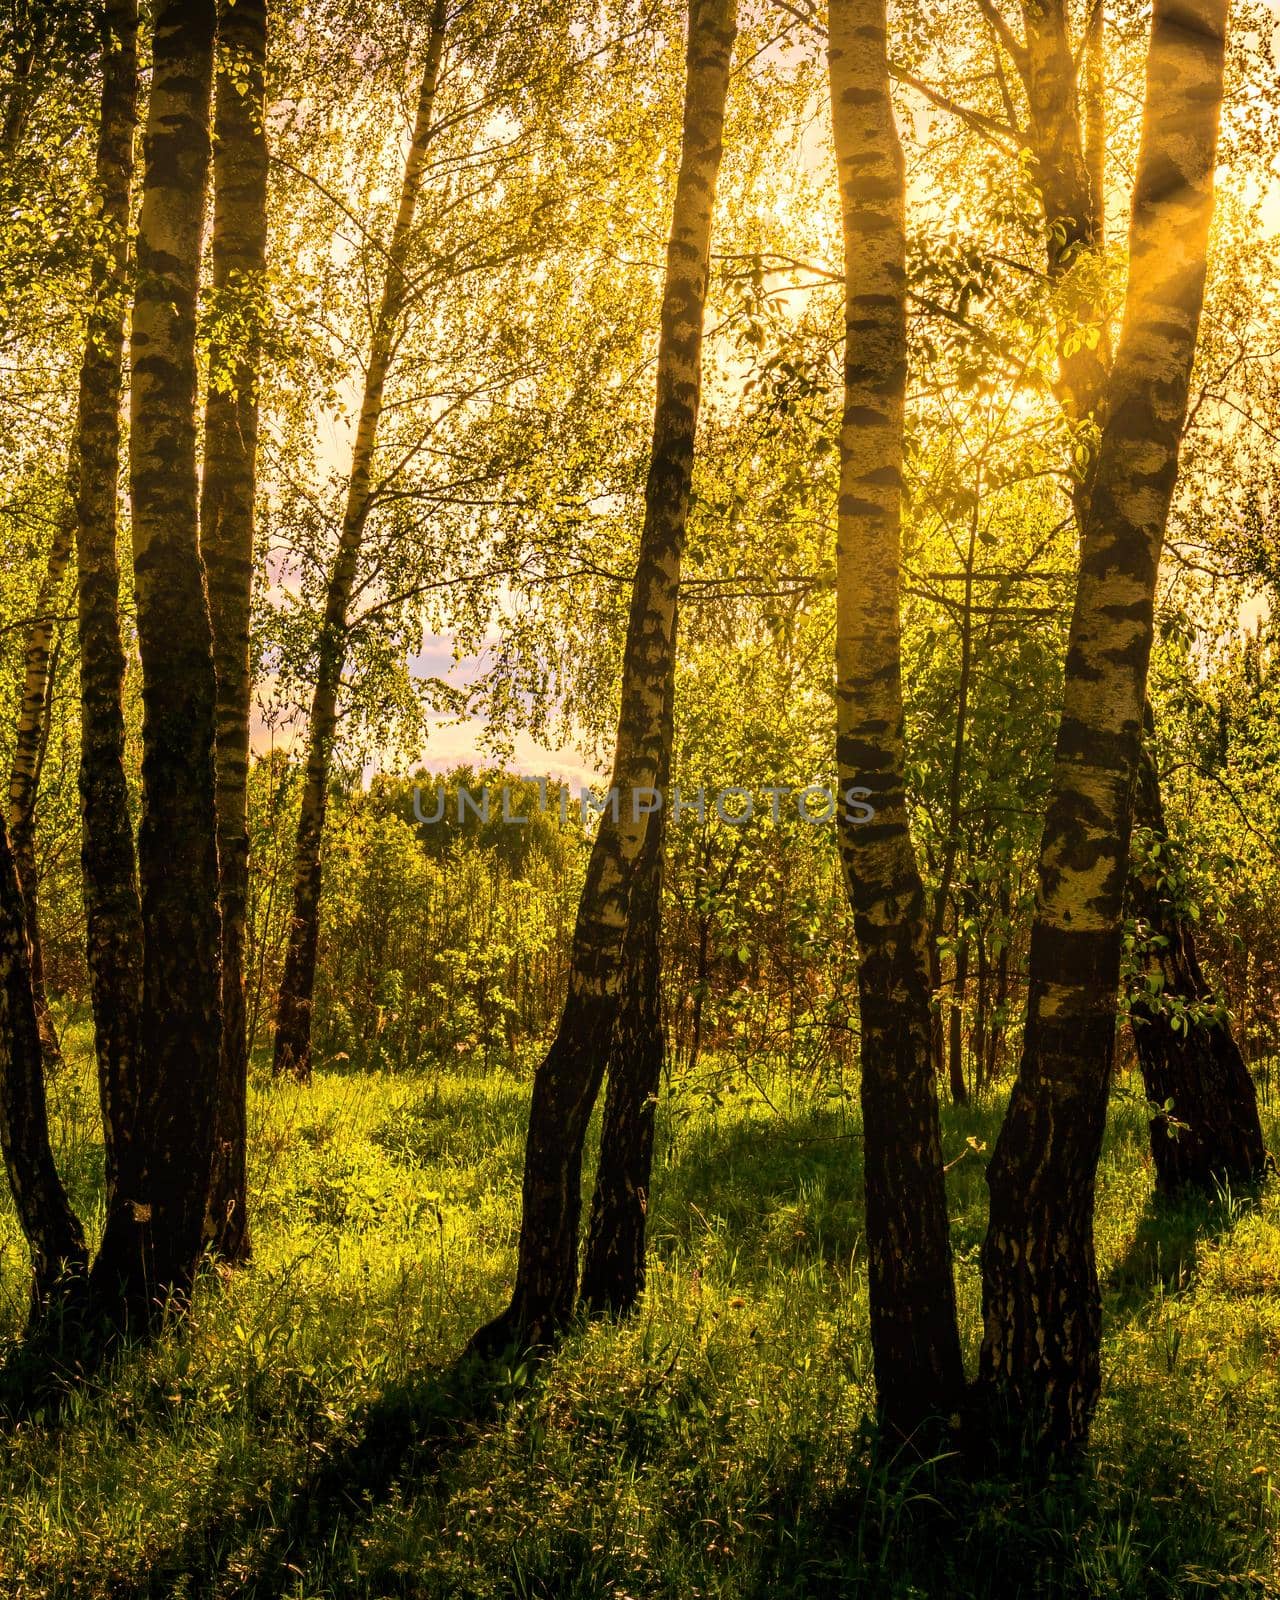 Sunrise or sunset in a spring birch forest with rays of sun shining through tree trunks by shadows and young green grass. Misty landscape.